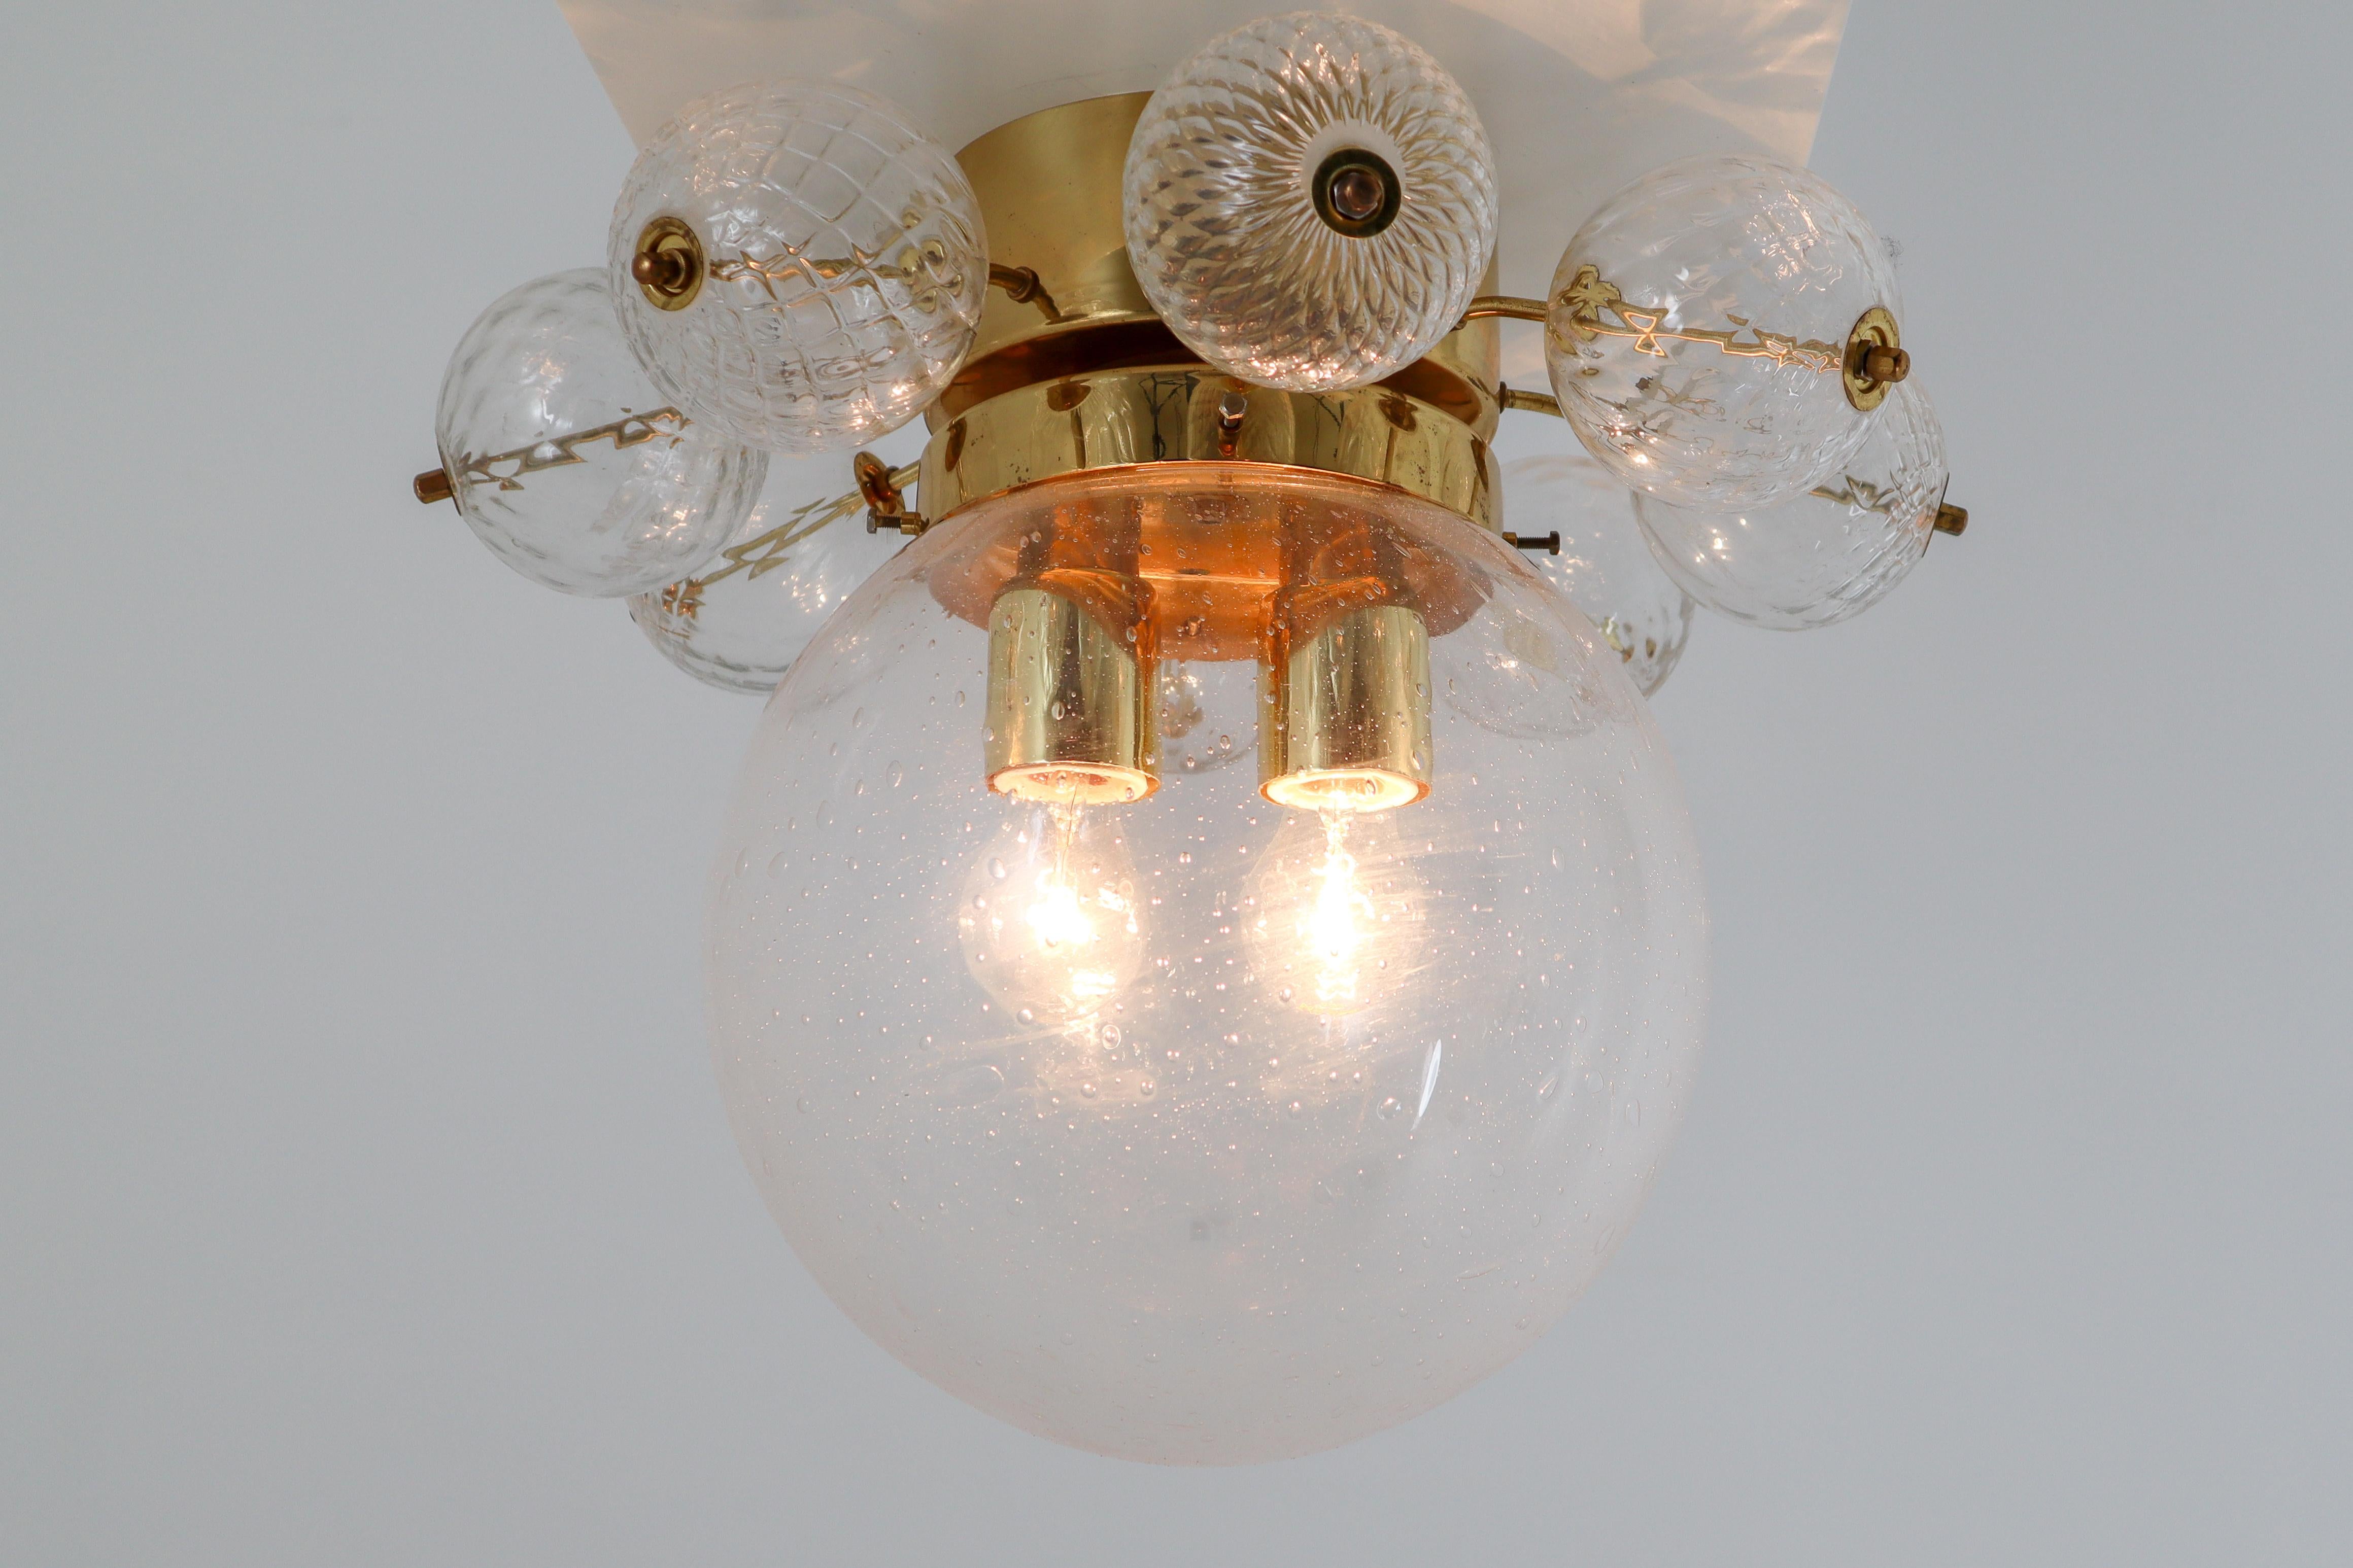 Large Midcentury Brass Ceiling Lamp-Chandeliers with Hand Blown Glass In Good Condition For Sale In Almelo, NL